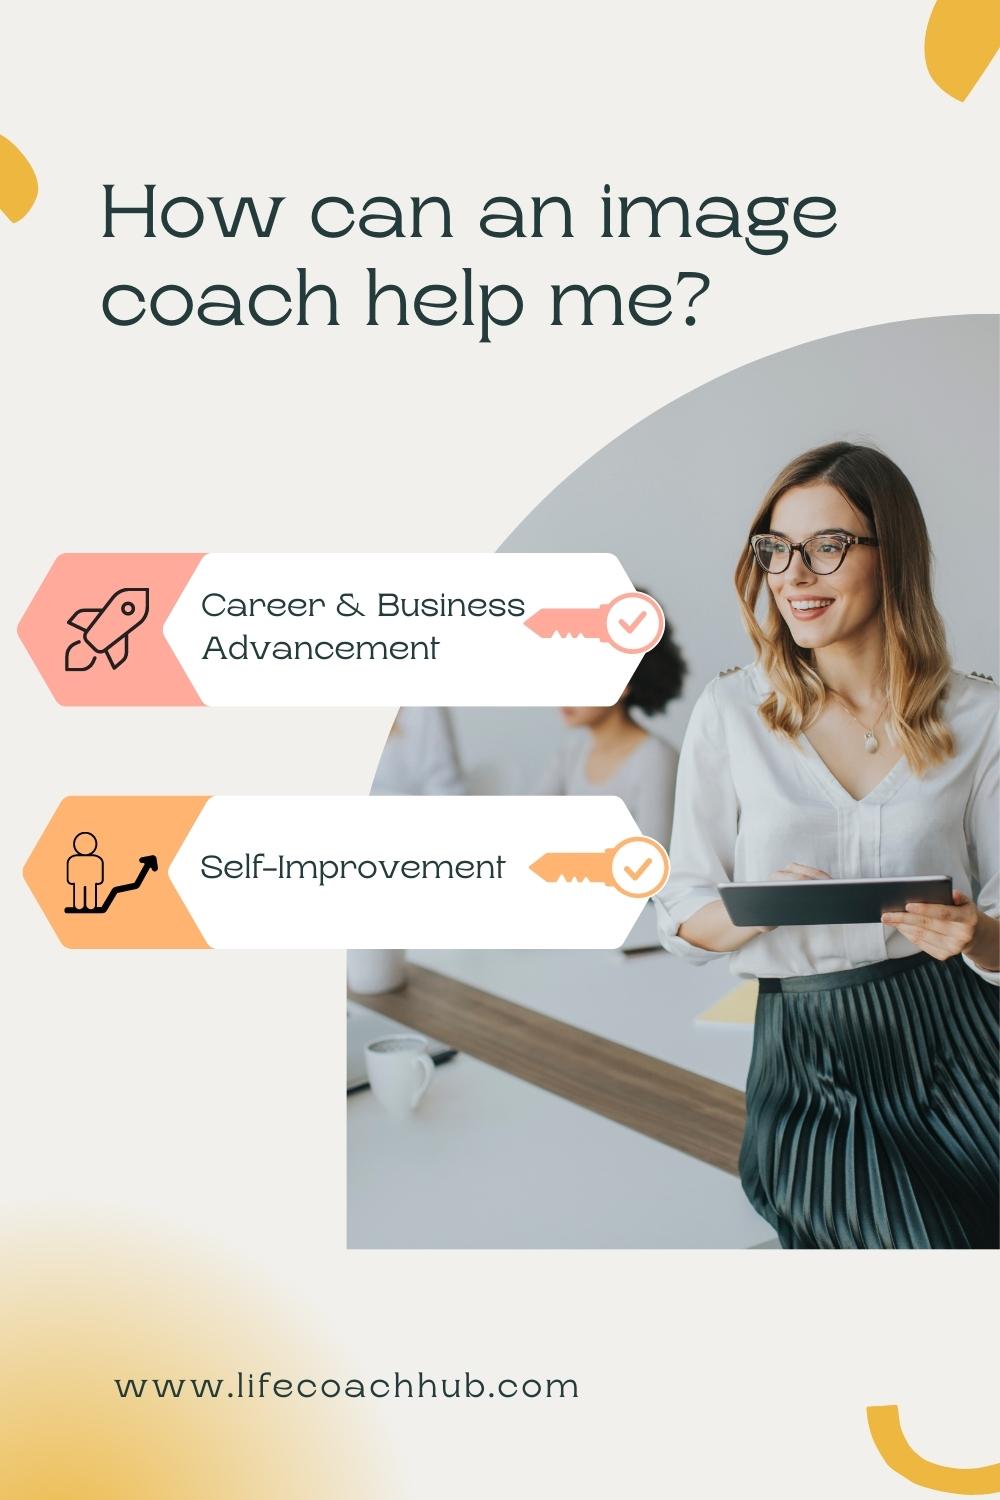 How can an image coach help me?